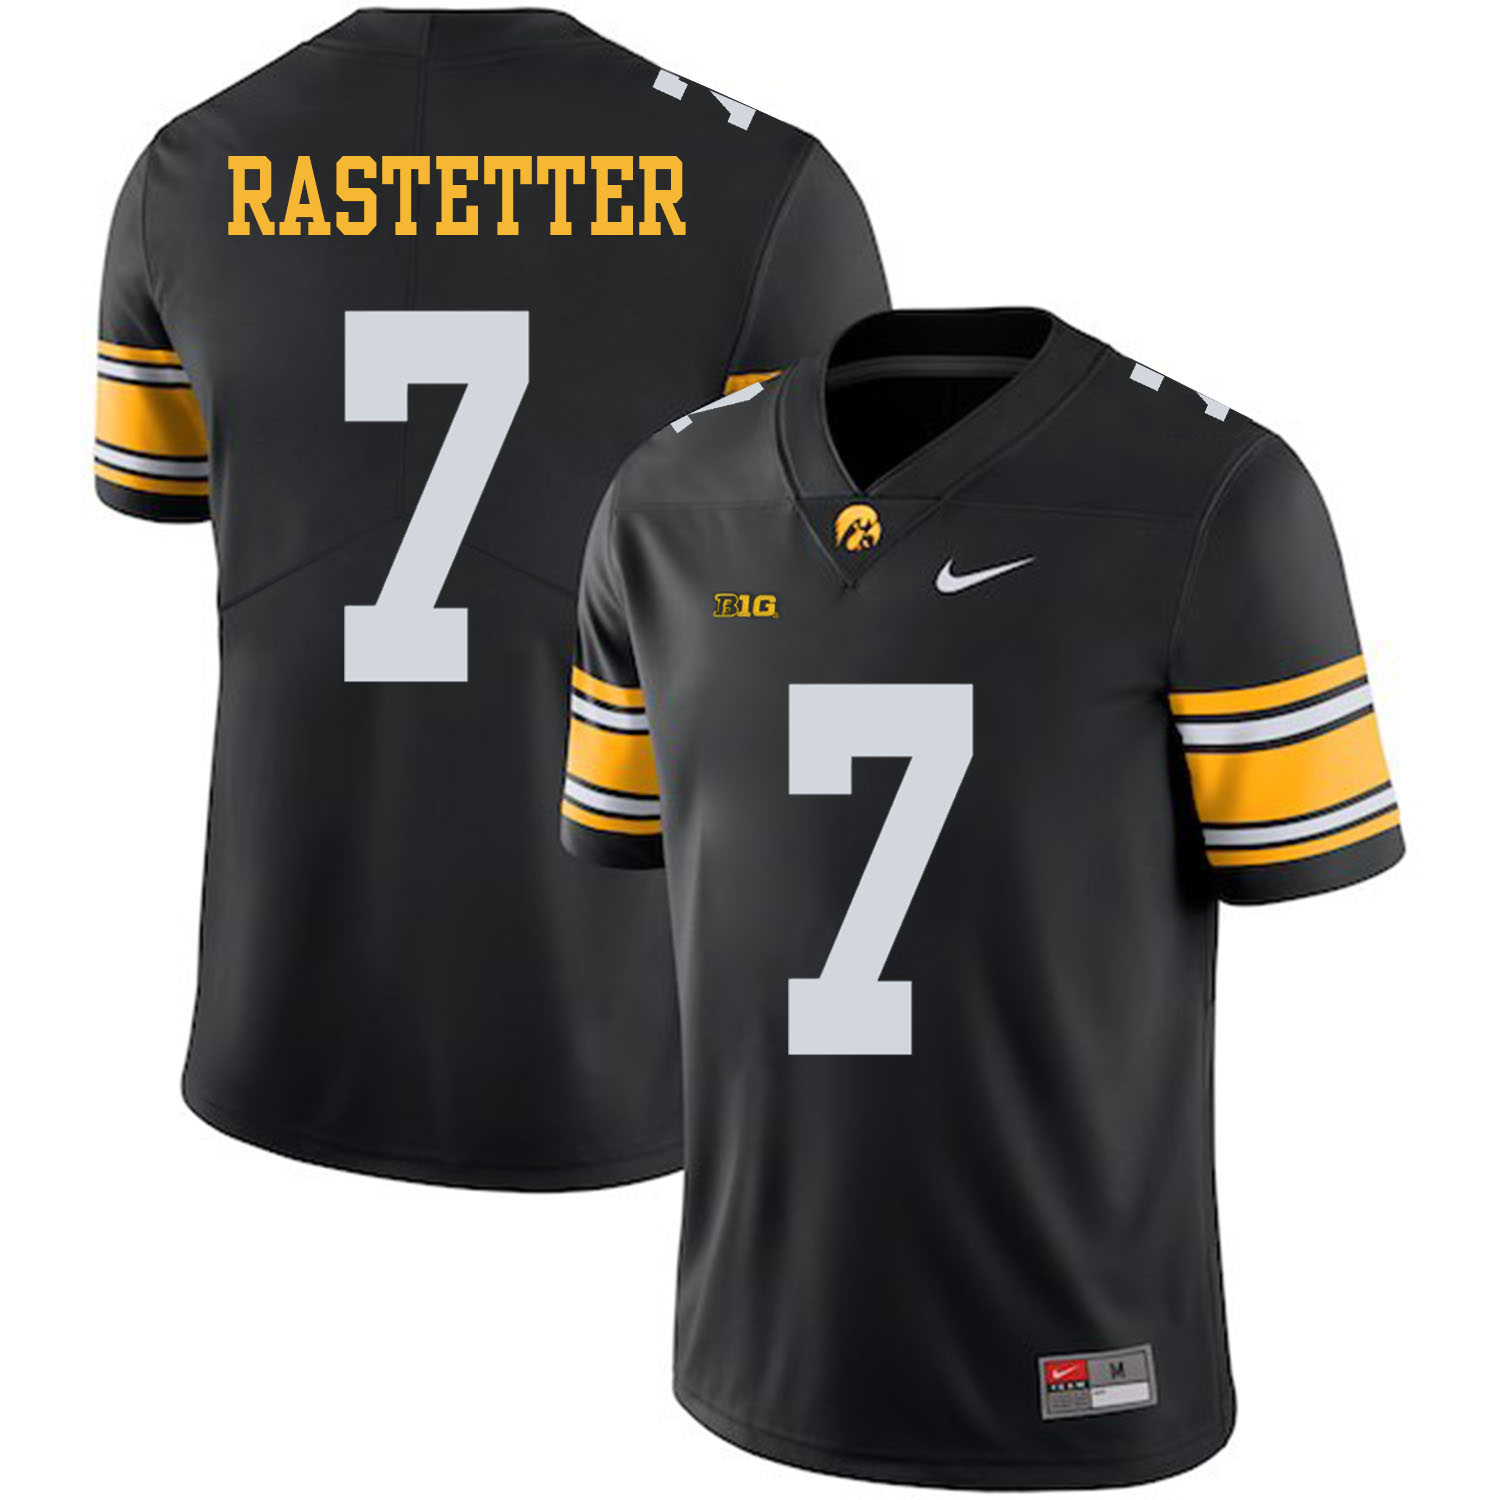 Iowa Hawkeyes 7 Colten Rastetter Black College Football Jersey - Click Image to Close